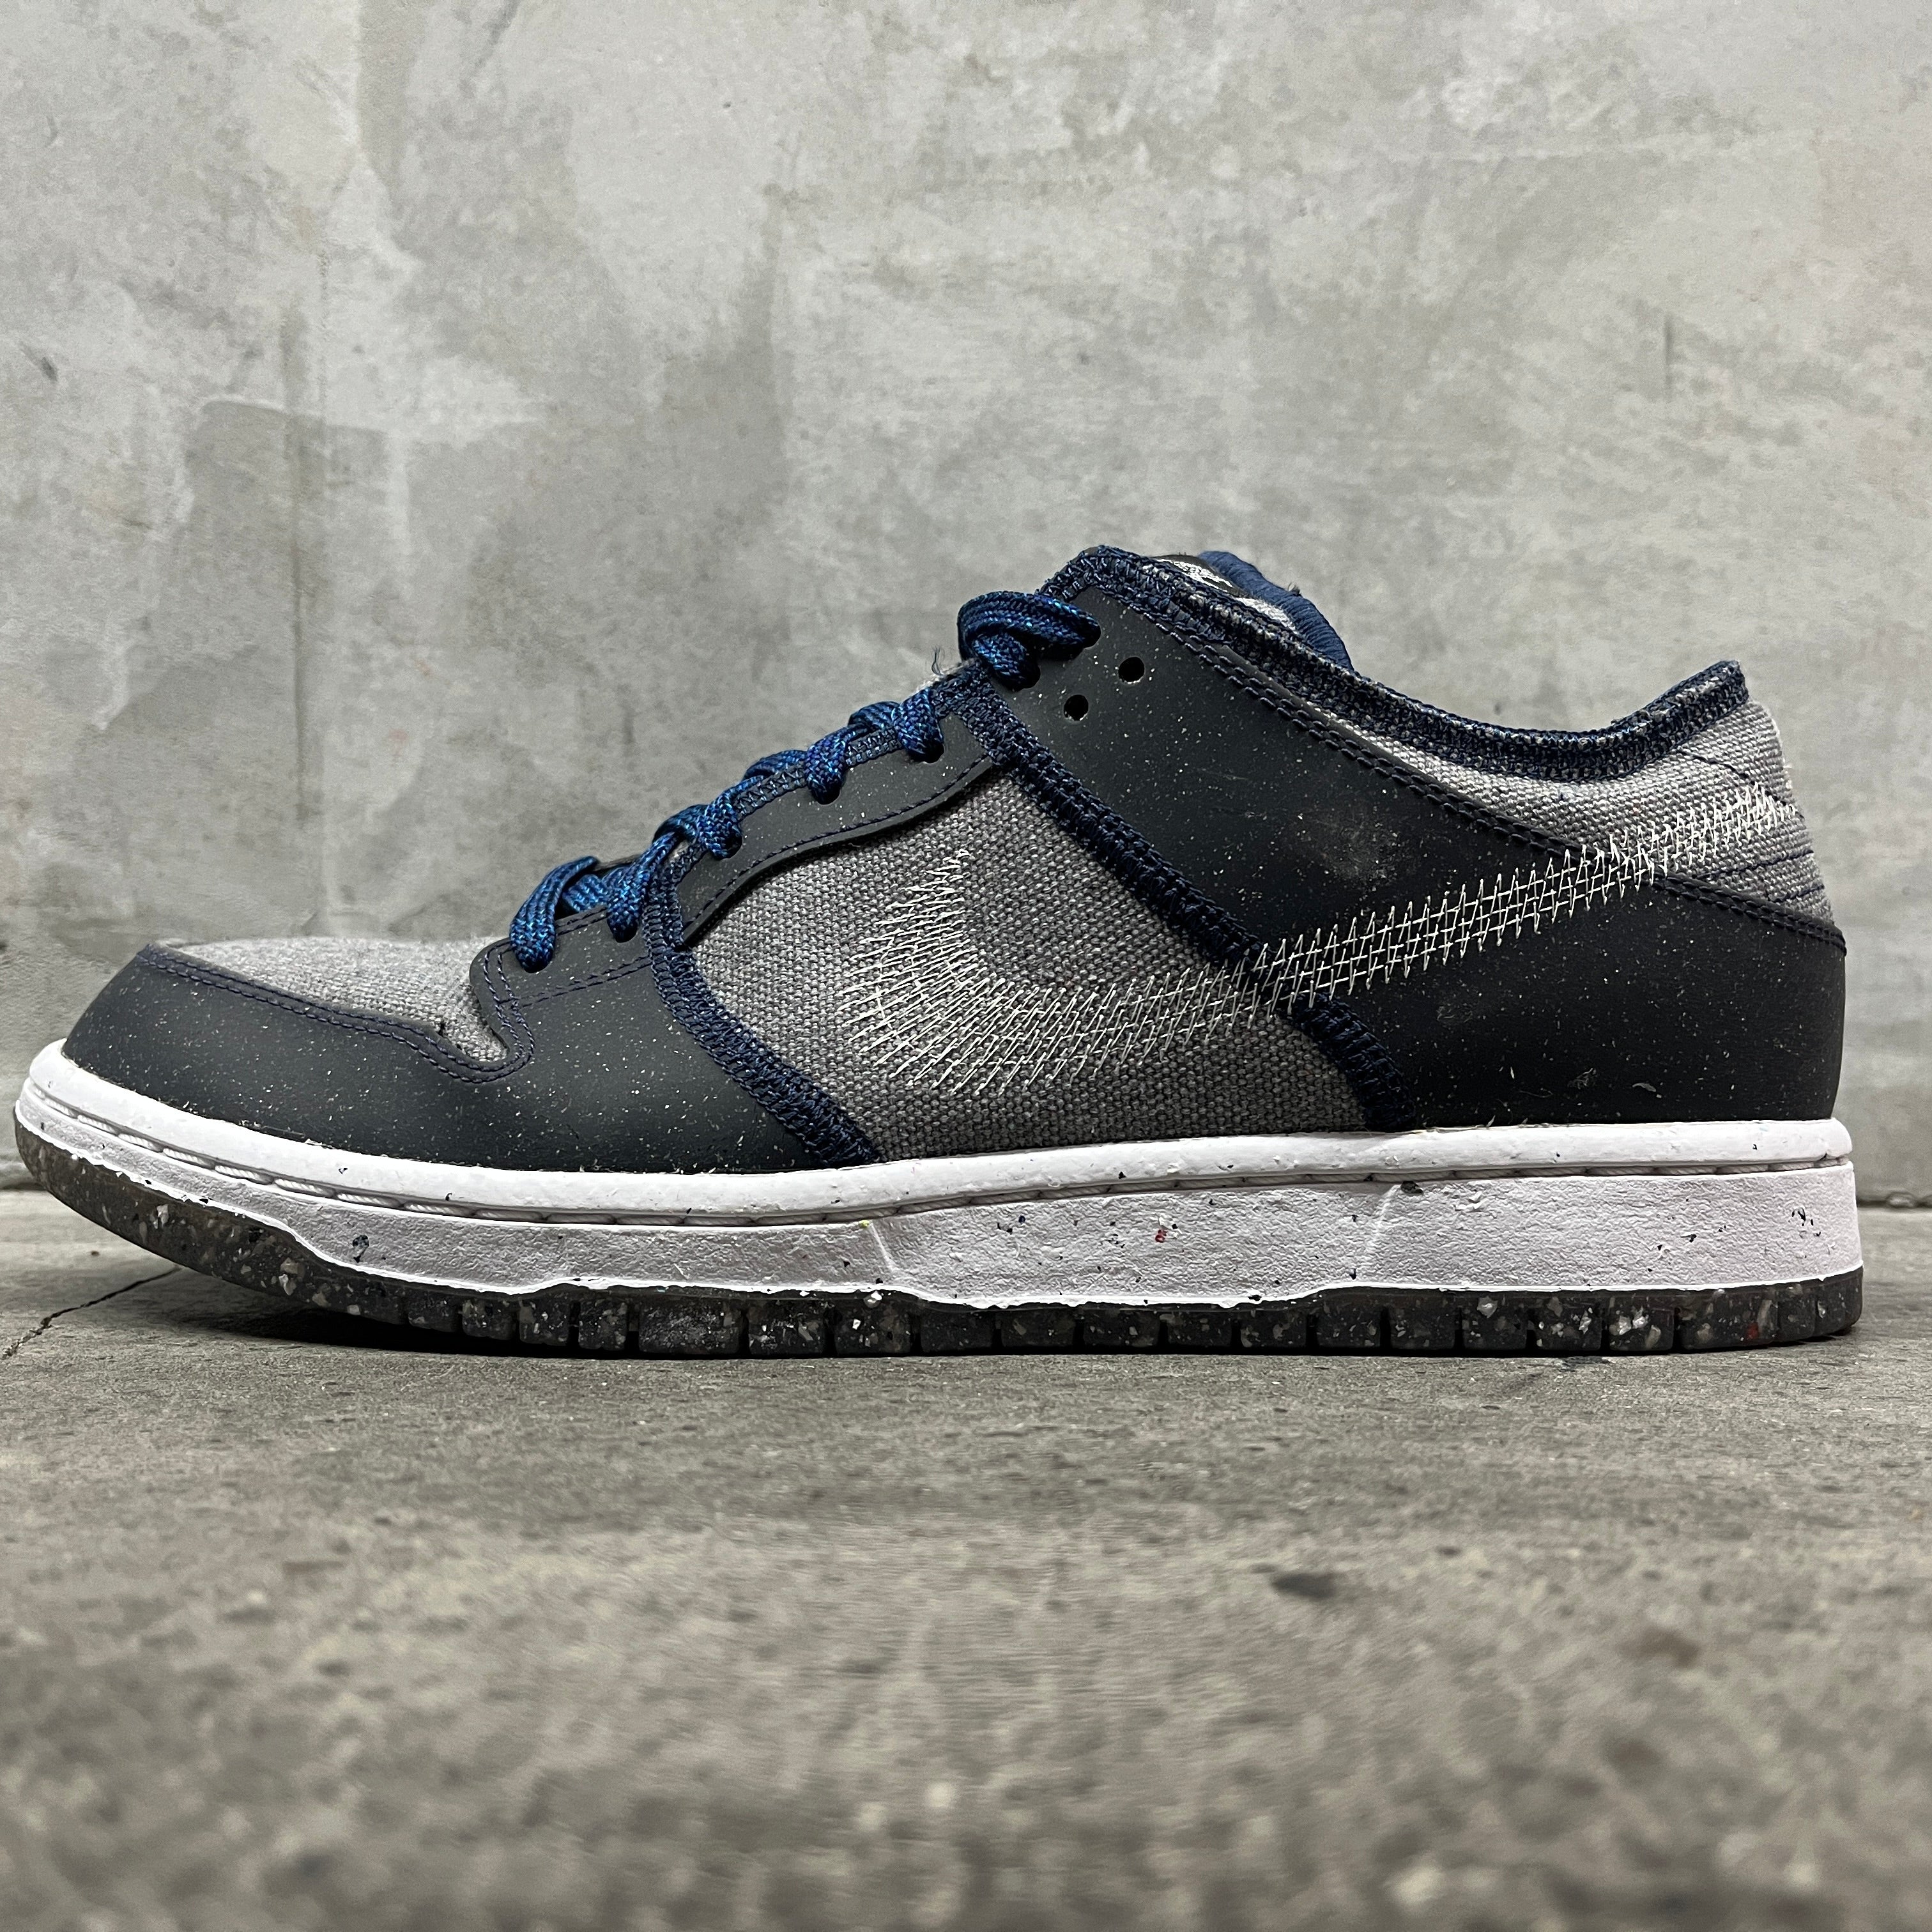 【US9.5】SB DUNK LOW PRO E "Crater" CT2224-001